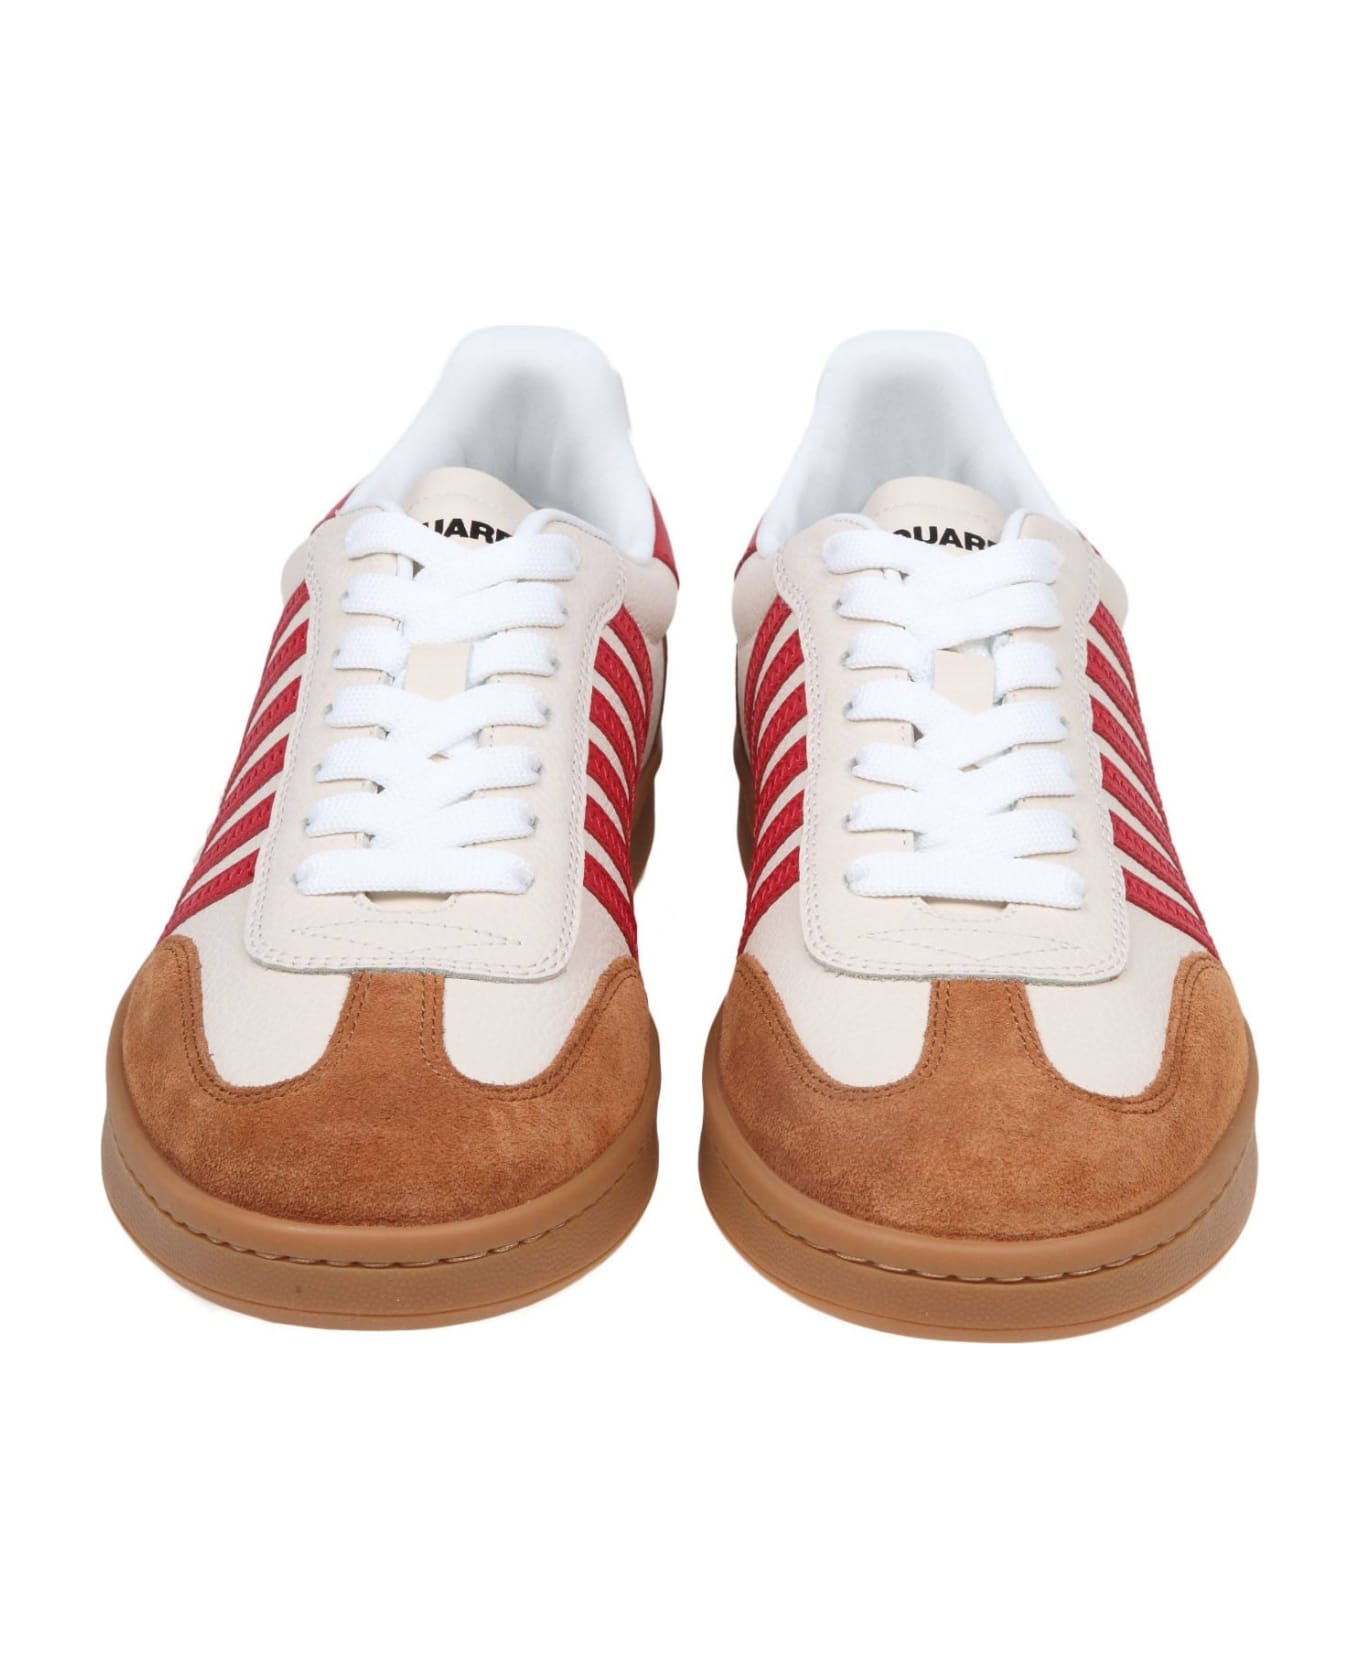 Dsquared2 Boxer Sneakers In White/red Leather And Suede - White/Red